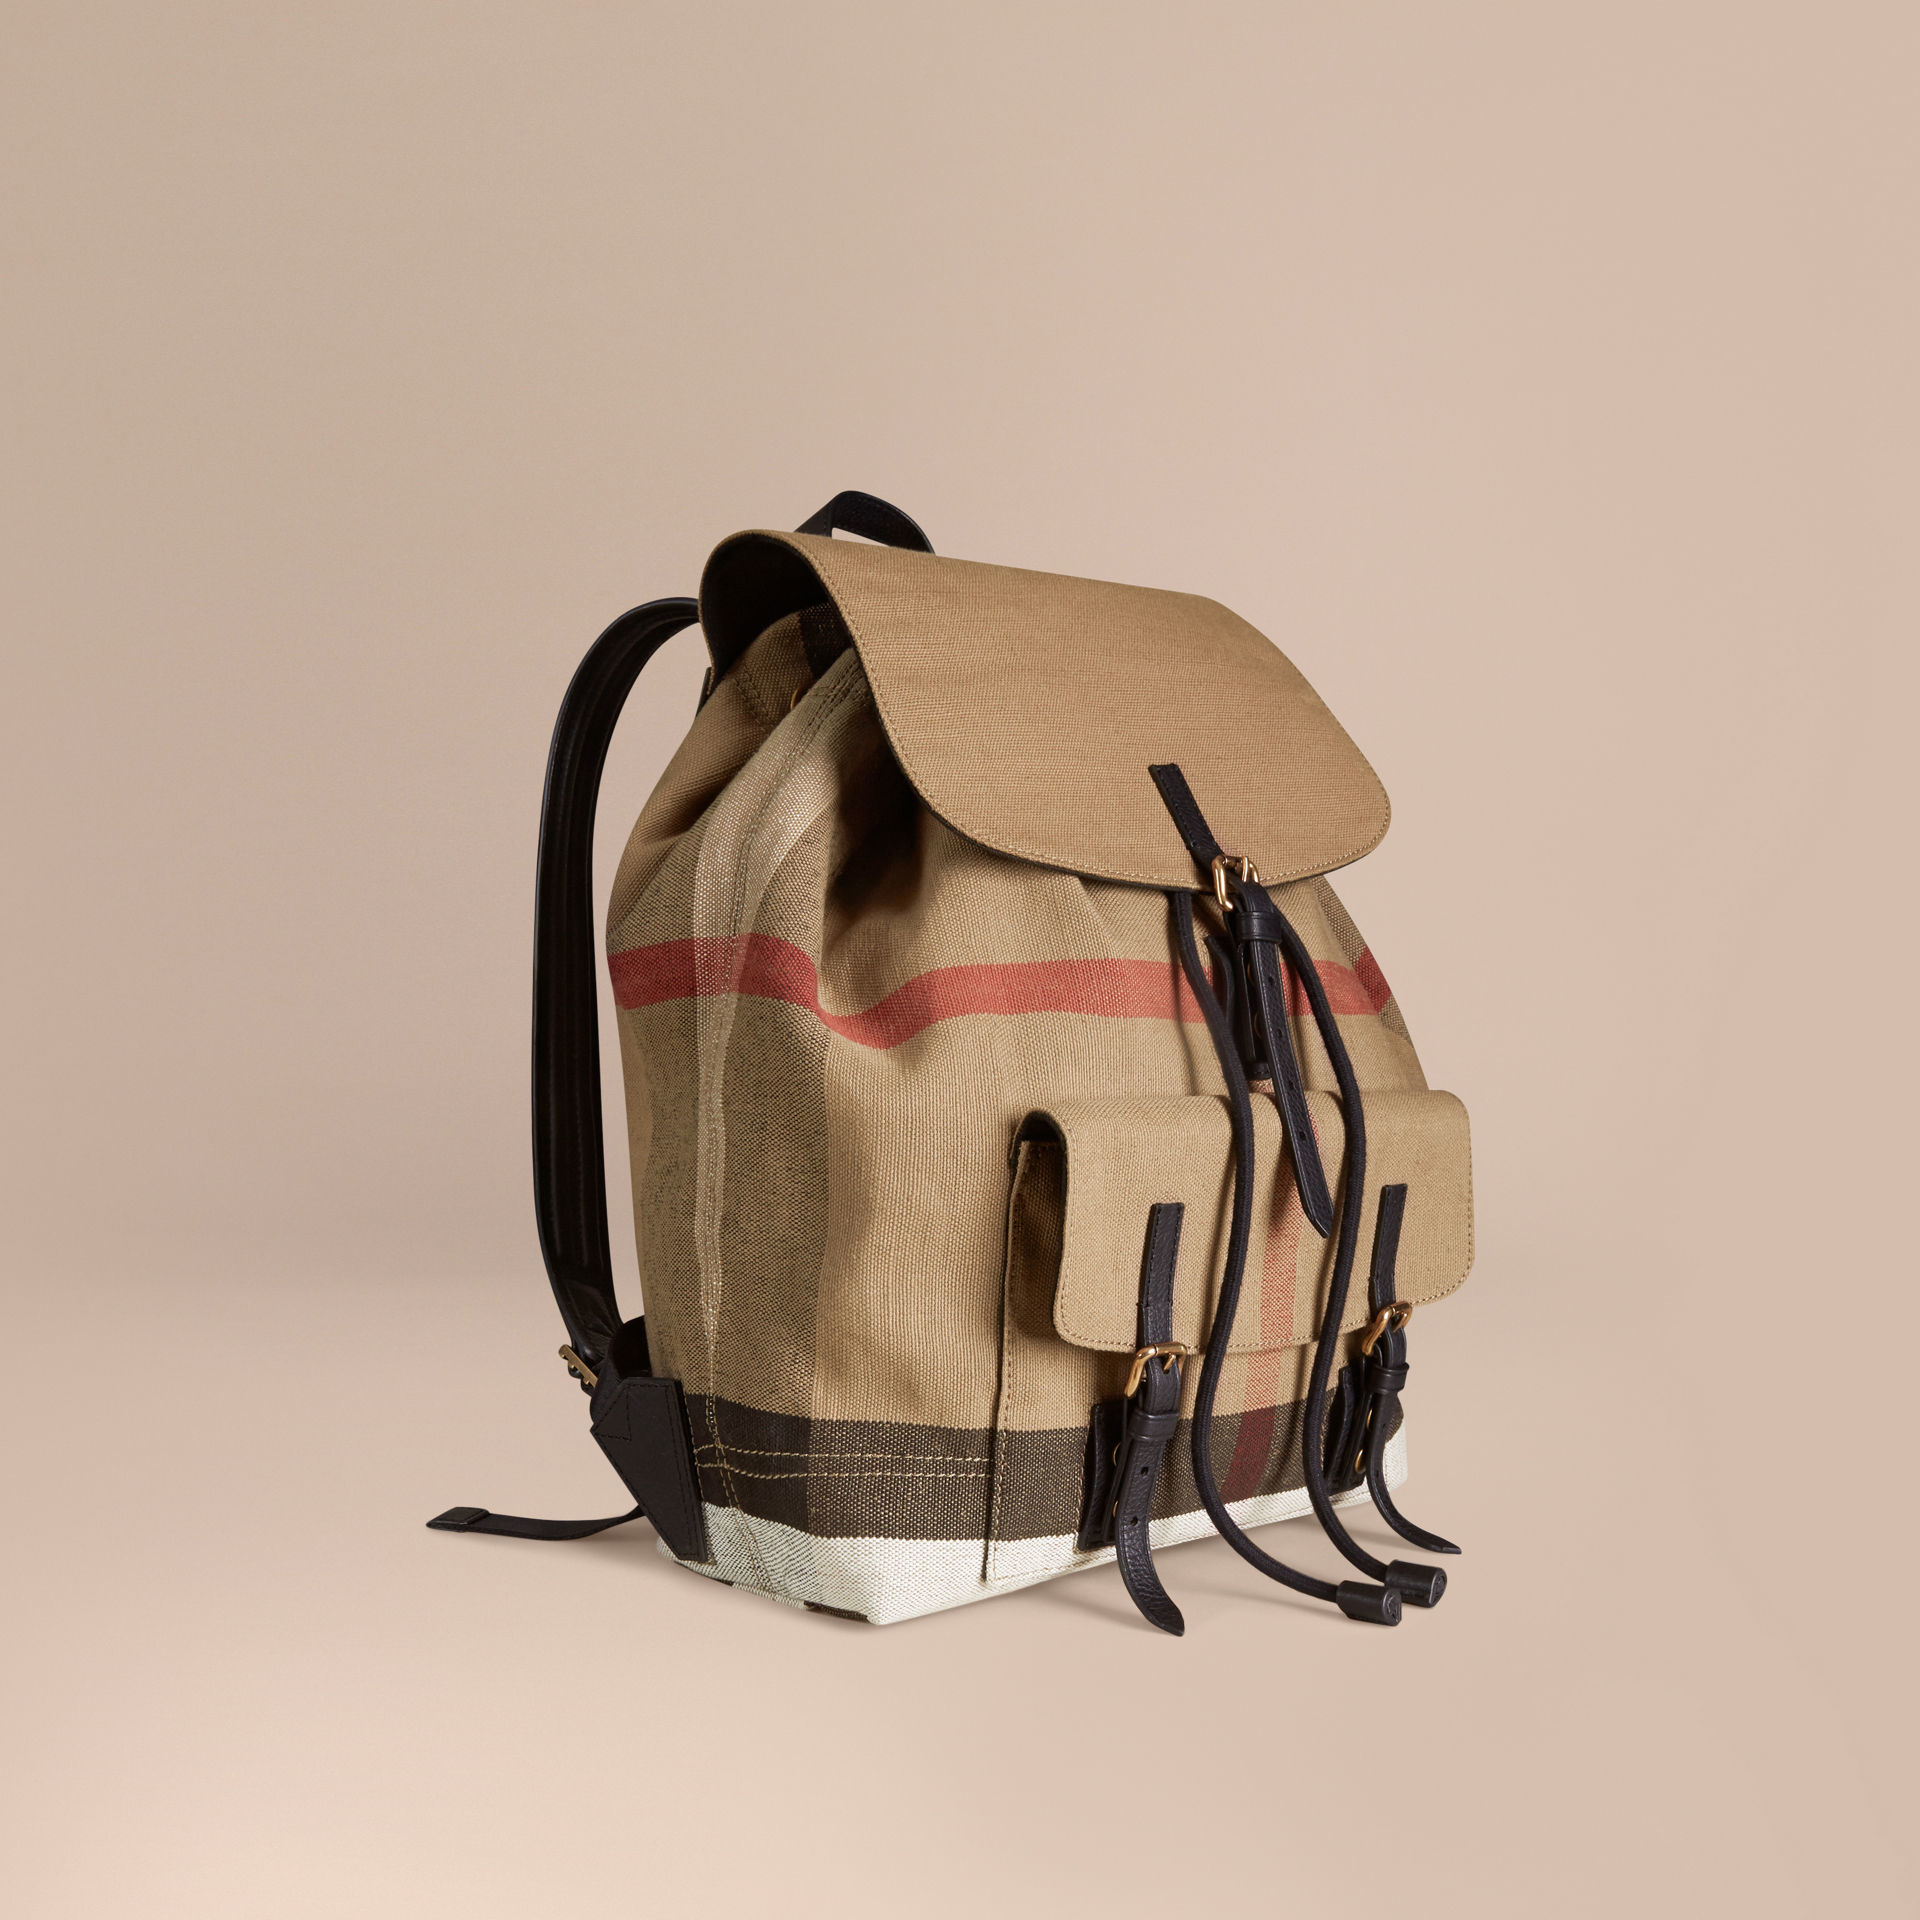 Burberry Canvas Check Backpack in (Natural) for Men - Lyst